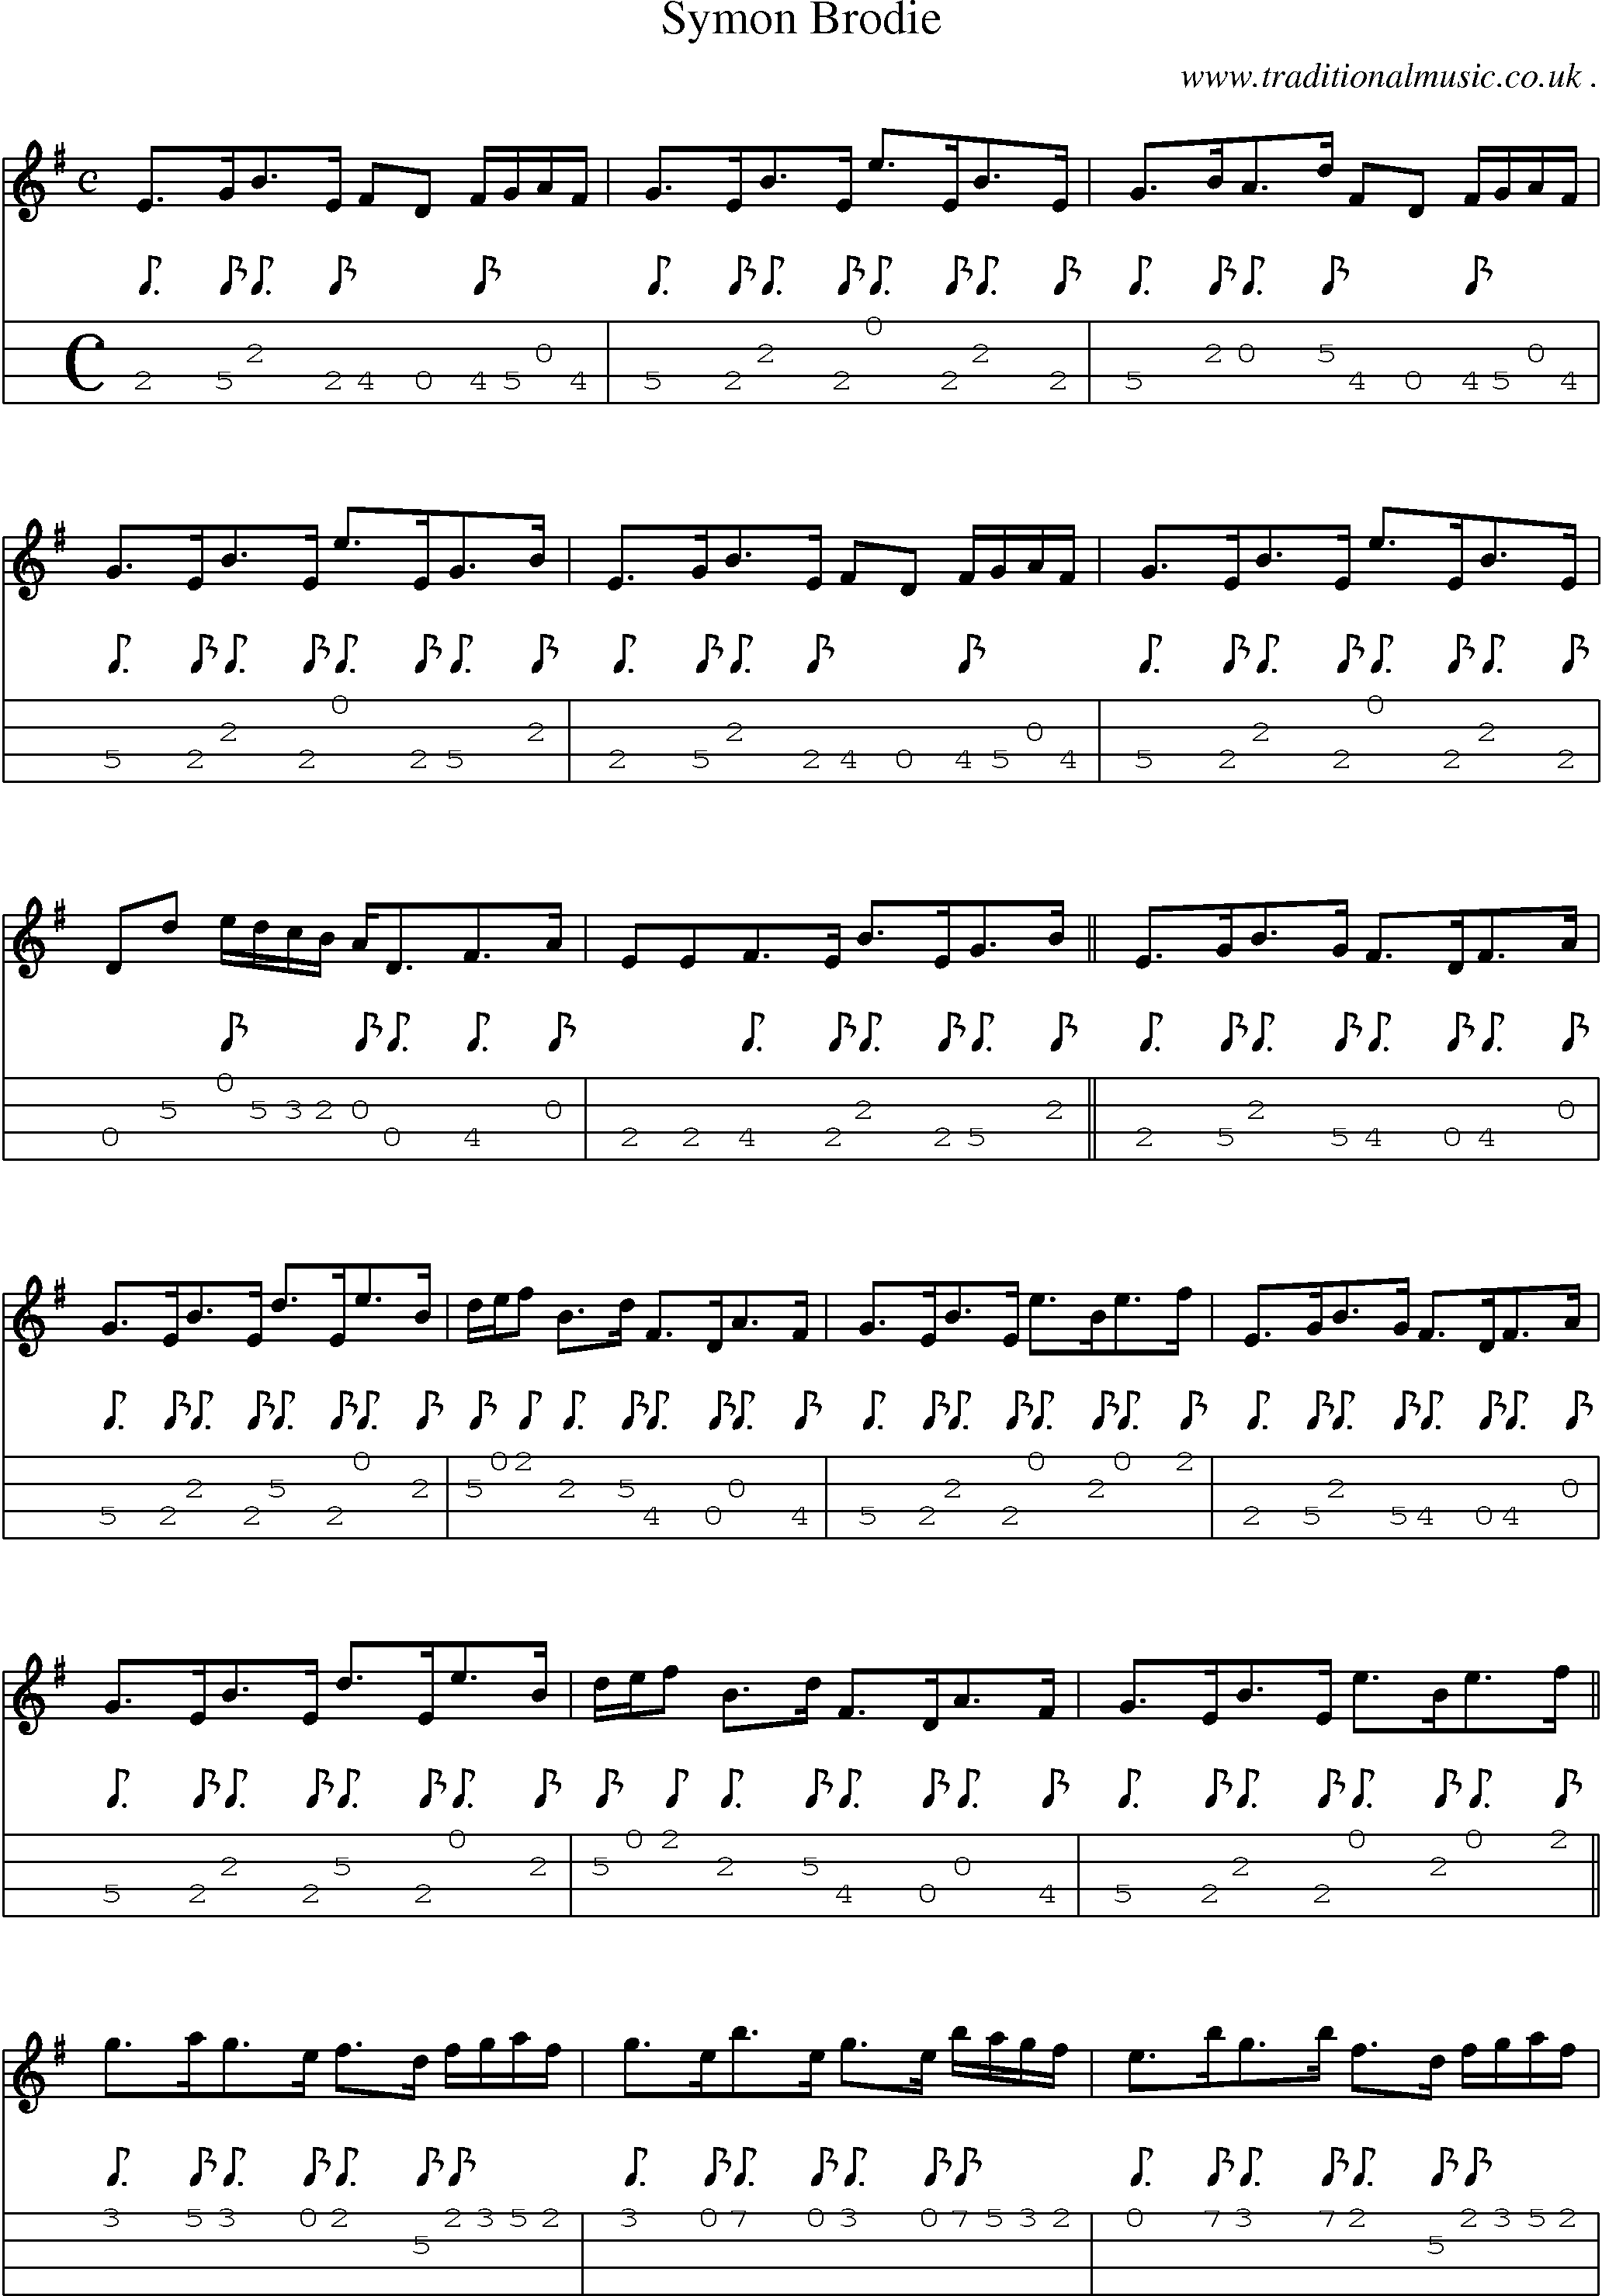 Sheet-music  score, Chords and Mandolin Tabs for Symon Brodie